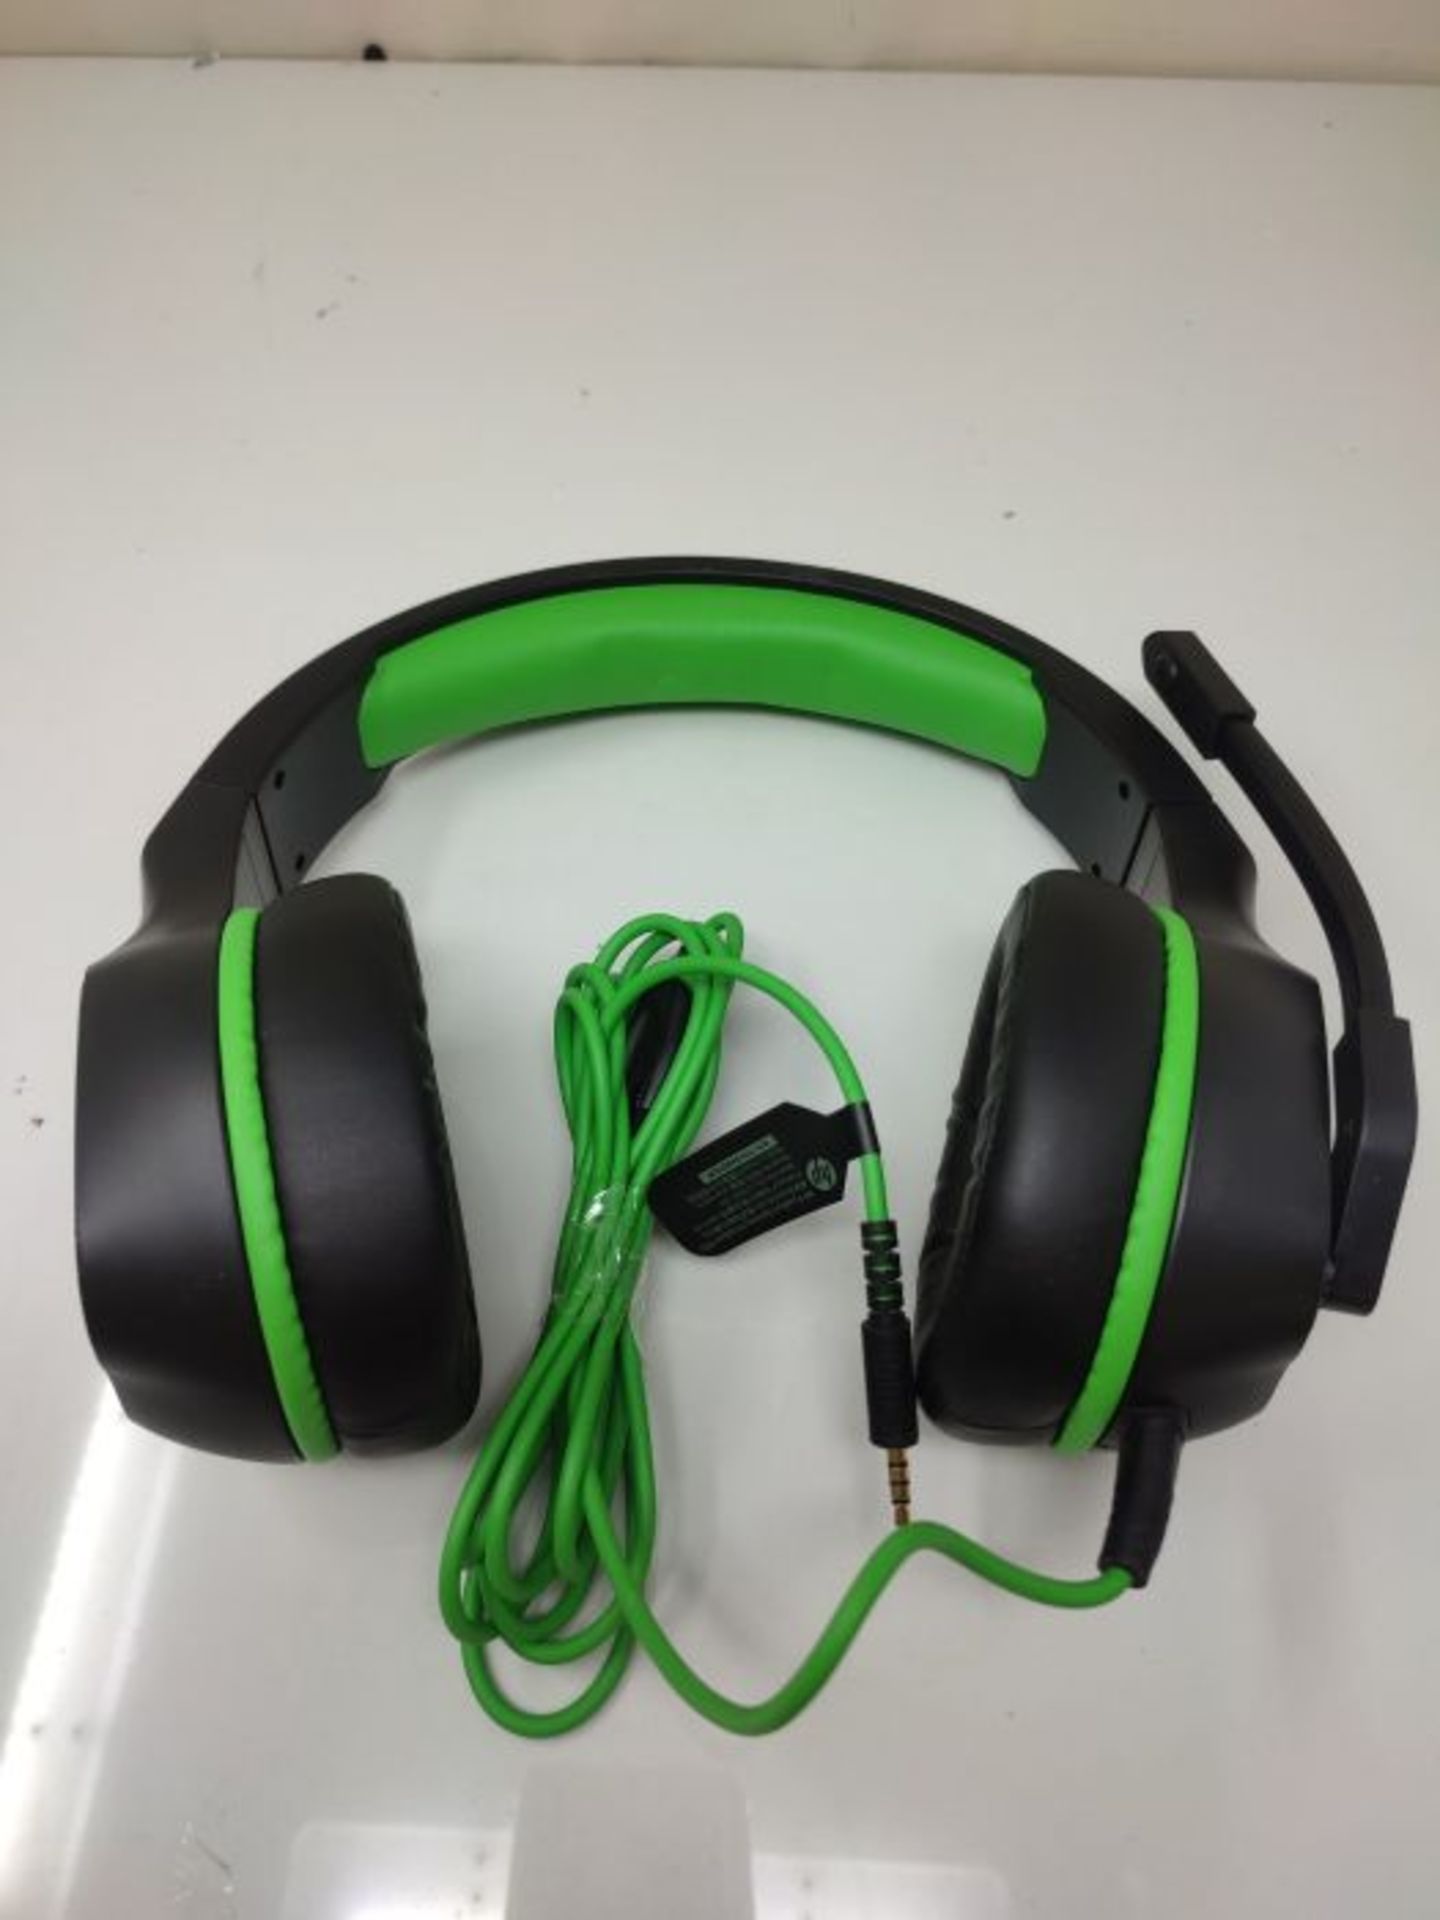 HP Pavilion Gaming Green Headset 400 - Padded Headset with Adjustable Mic and Control - Image 3 of 3